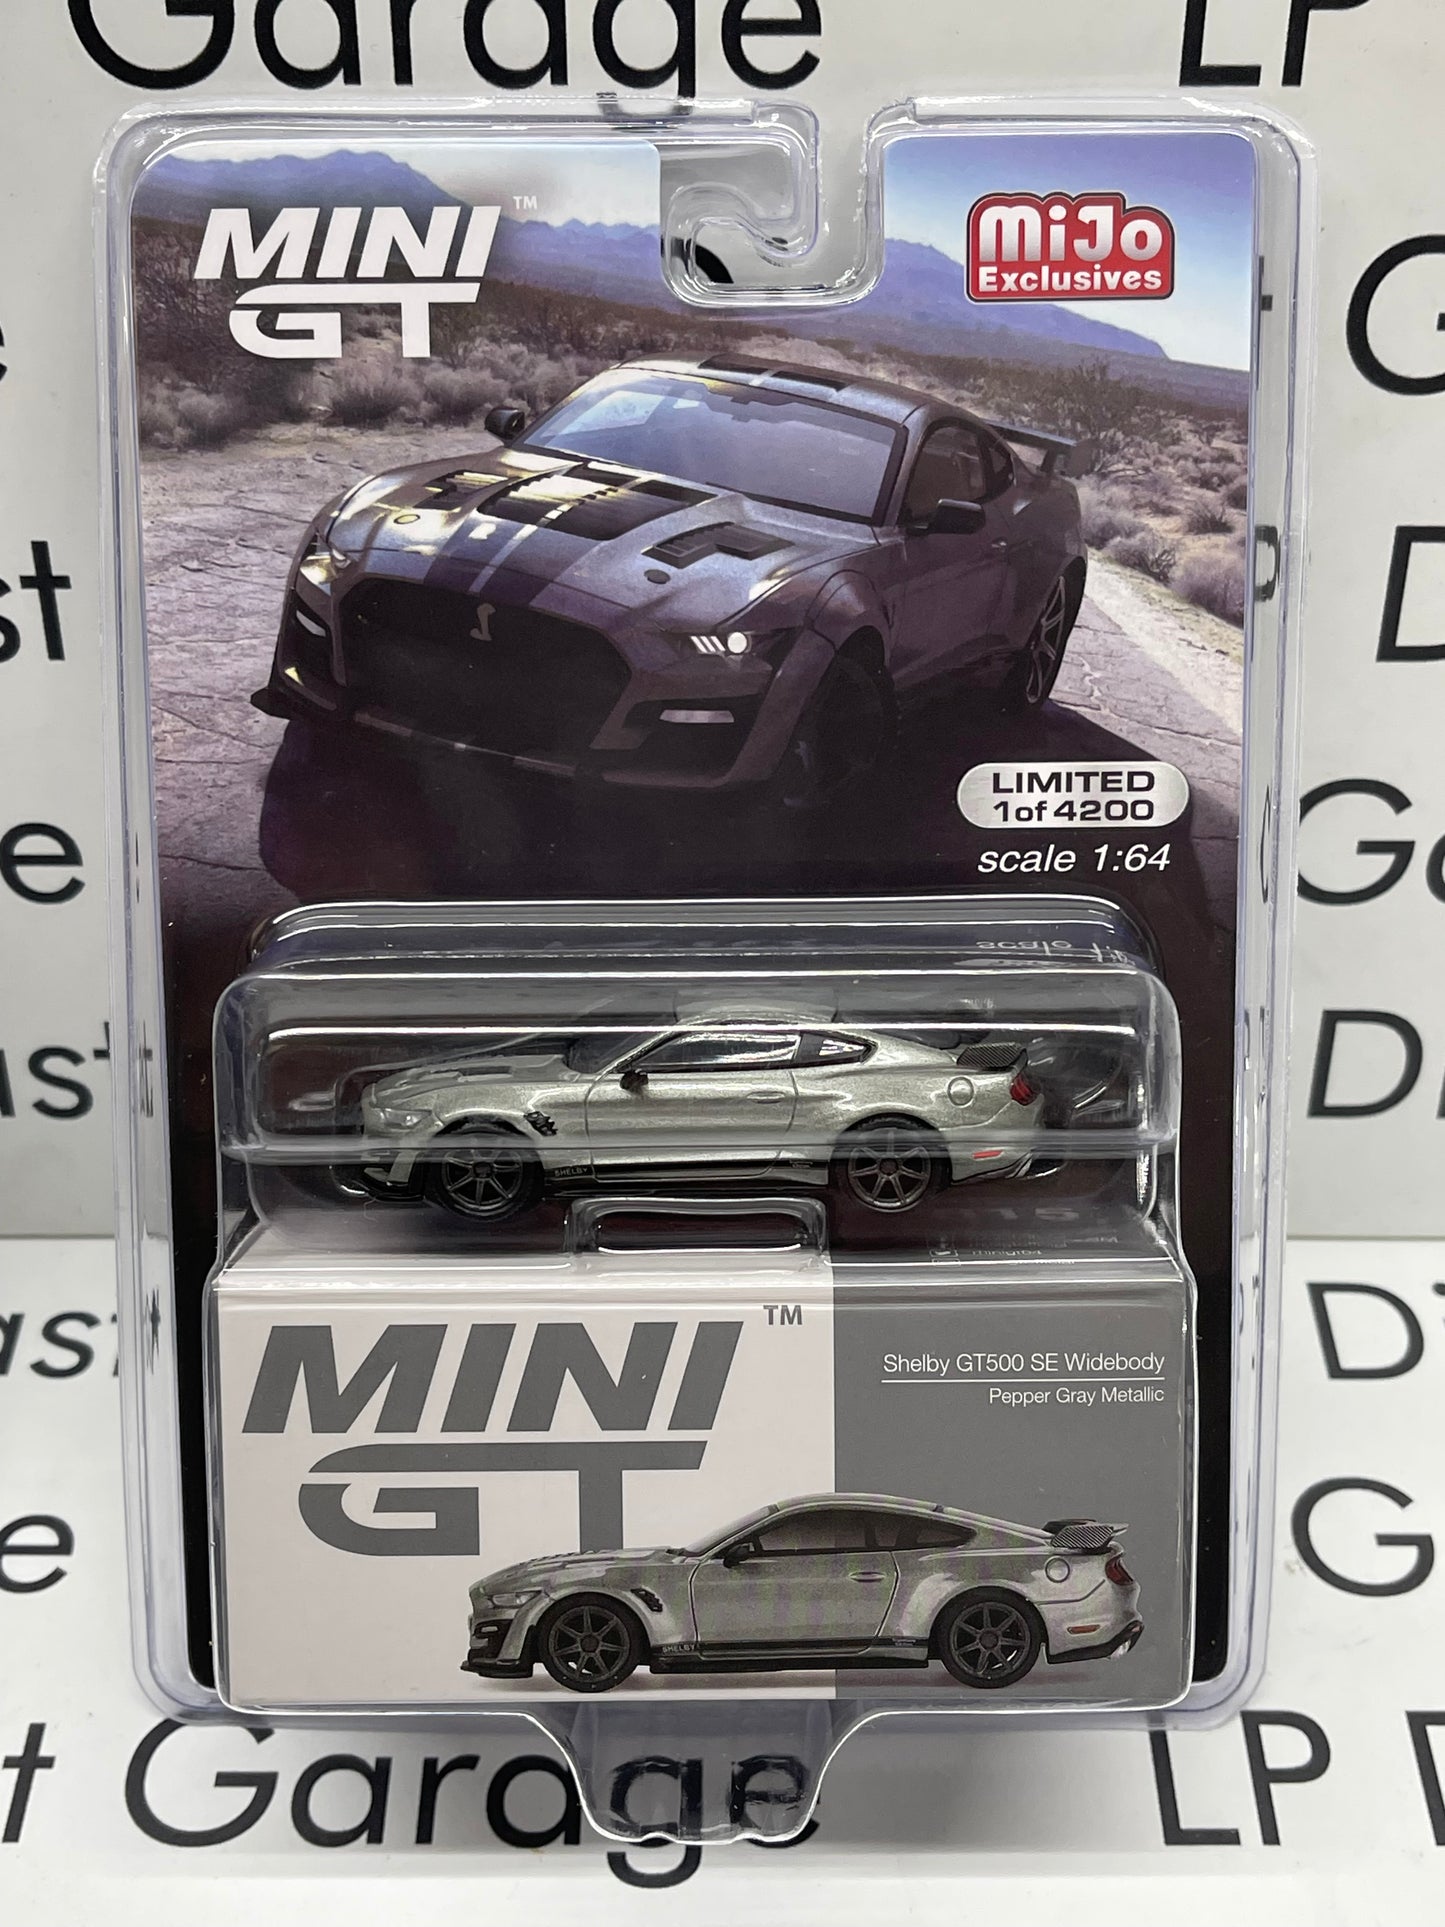 MINI GT 2022 Ford Mustang Shelby GT500 SE Widebody Pepper Grey Metallic 1:64 Diecast